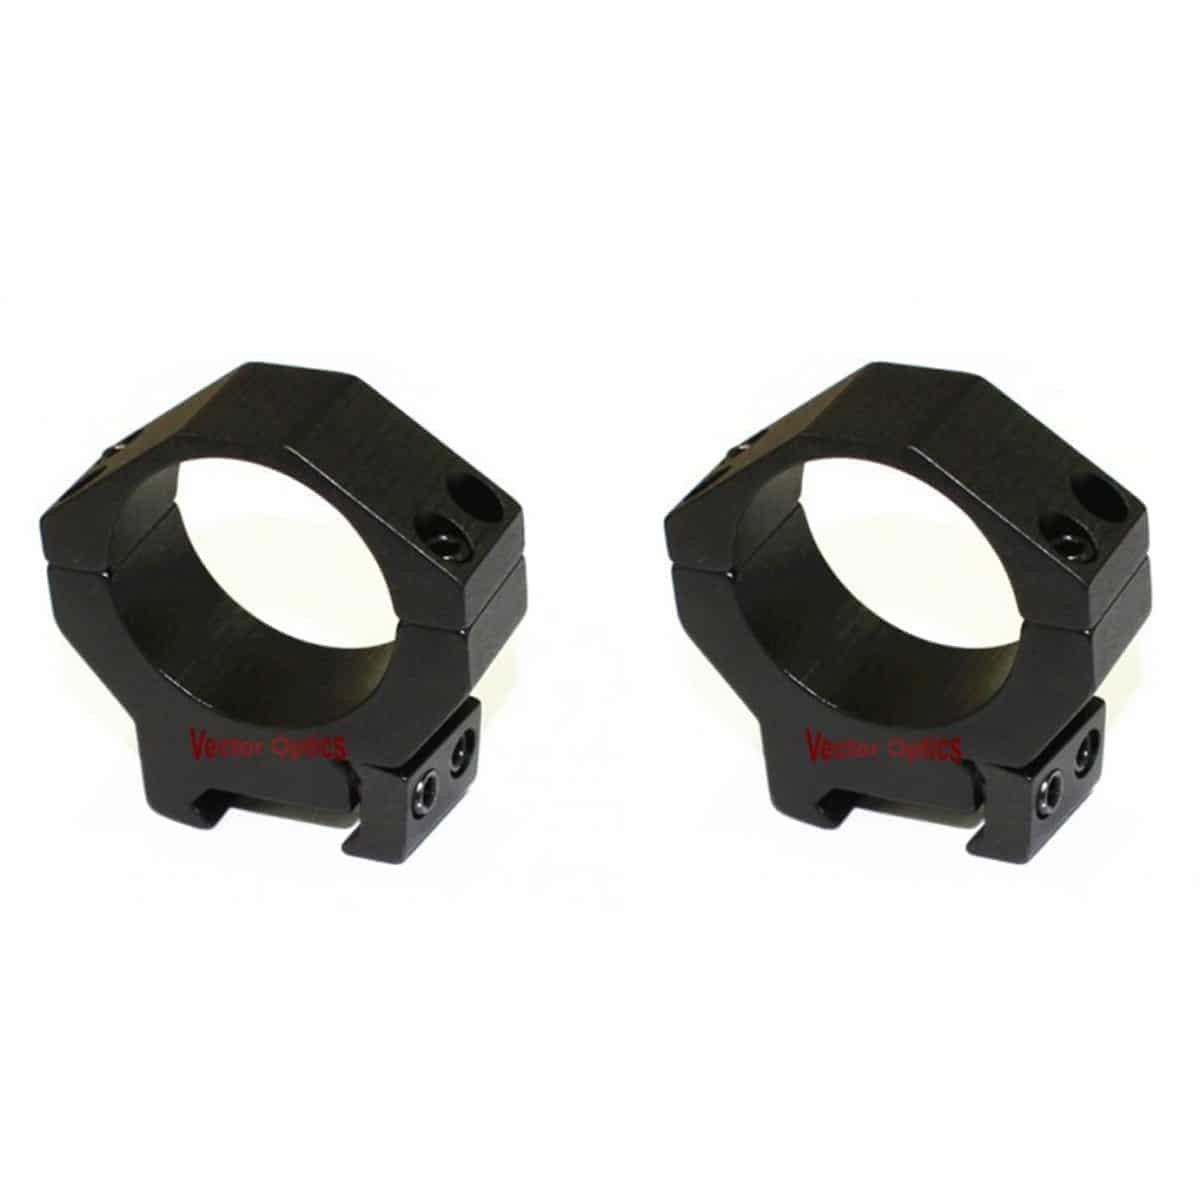 34mm Tactical Low Picatinny Mount Rings